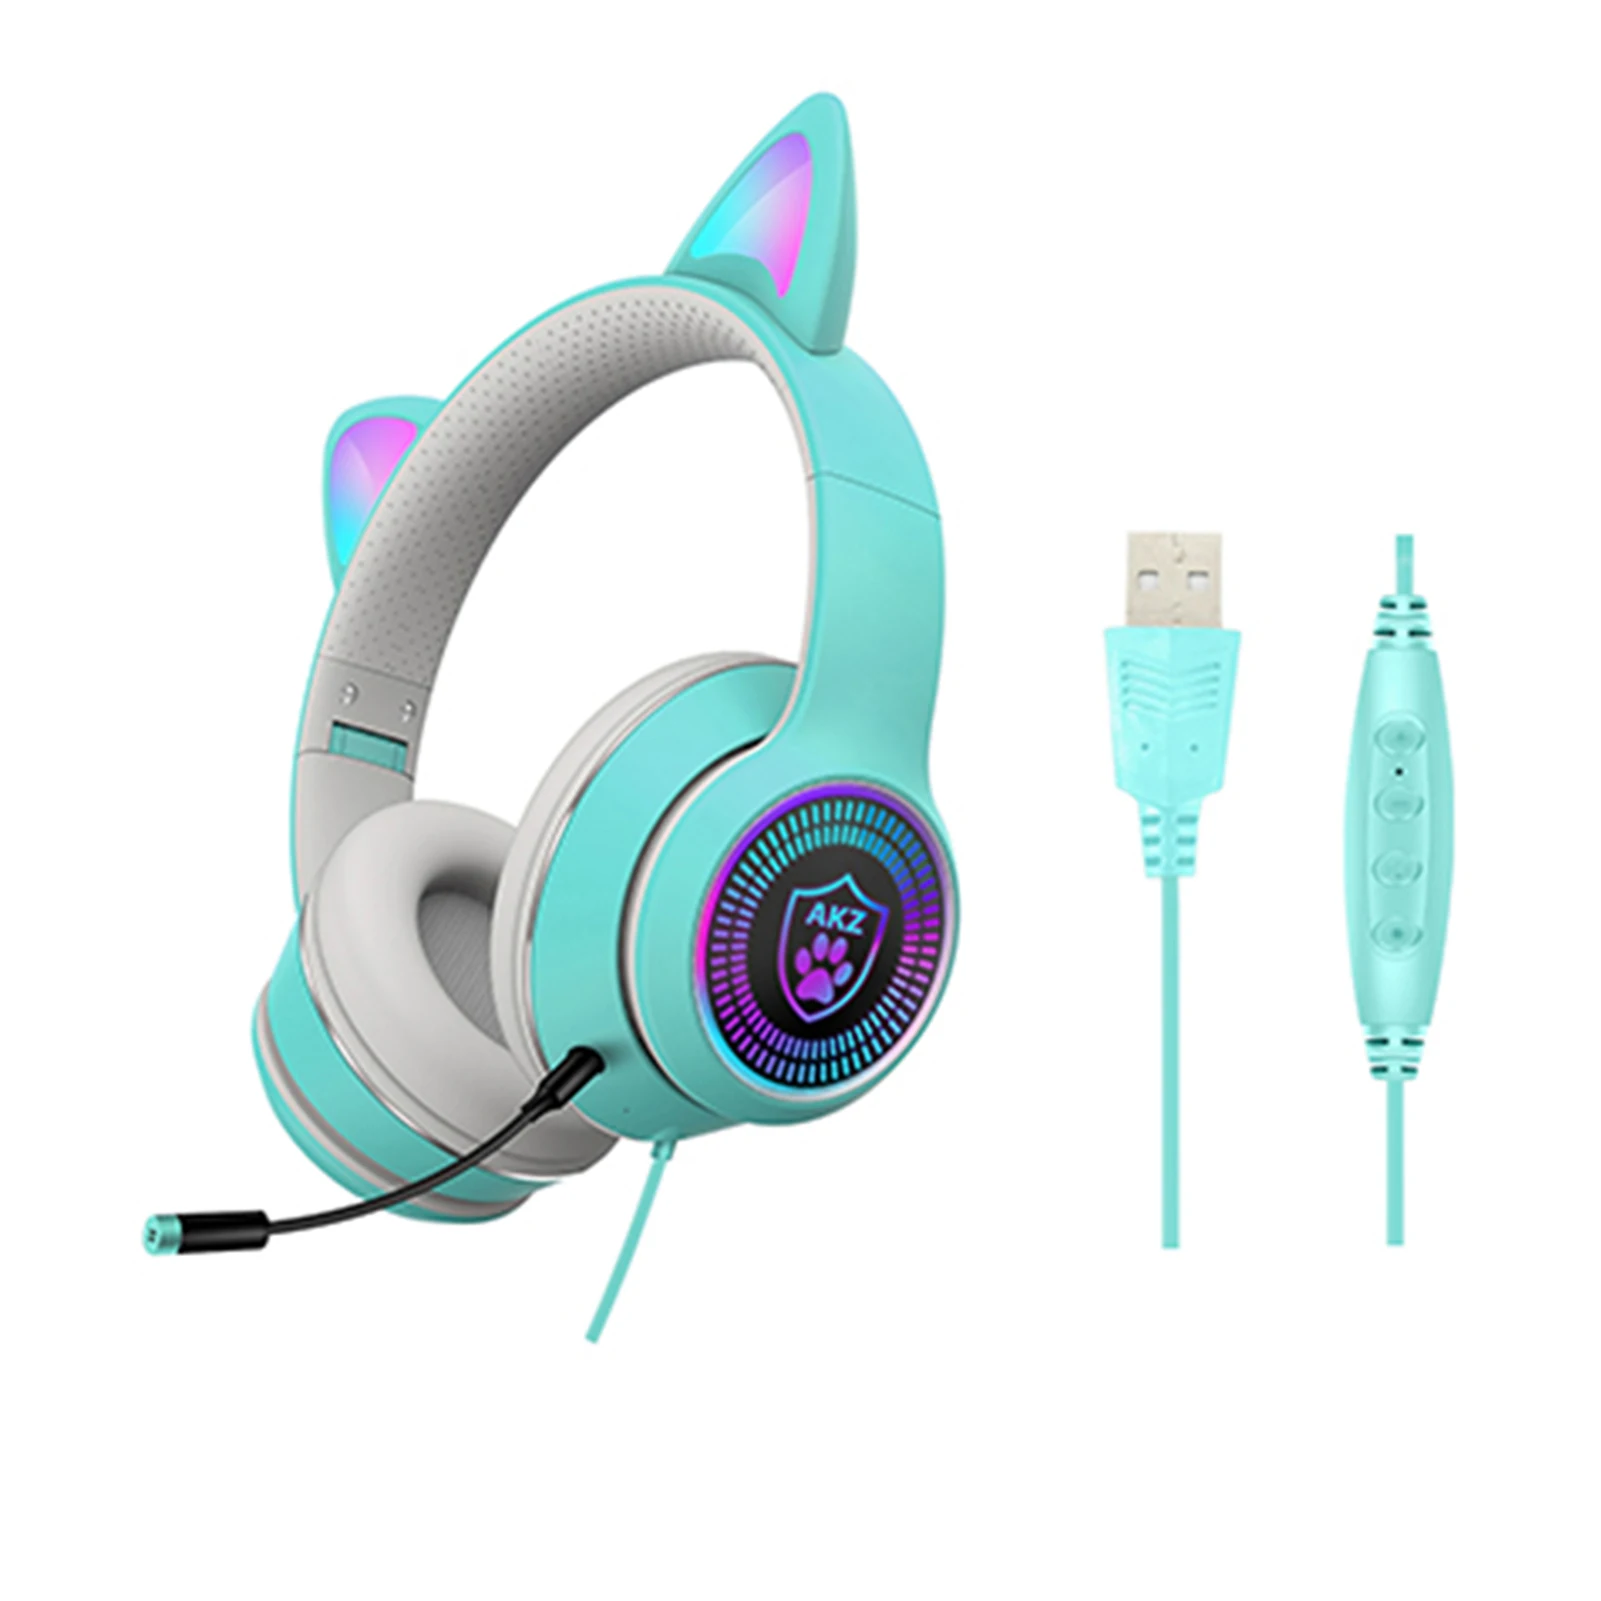 

Gaming Headset Noise Cancelling Cat Ear Ergonomic Foldable Fashion HiFi Stereo Lightweight RGB Light For PC Laptop USB Wired